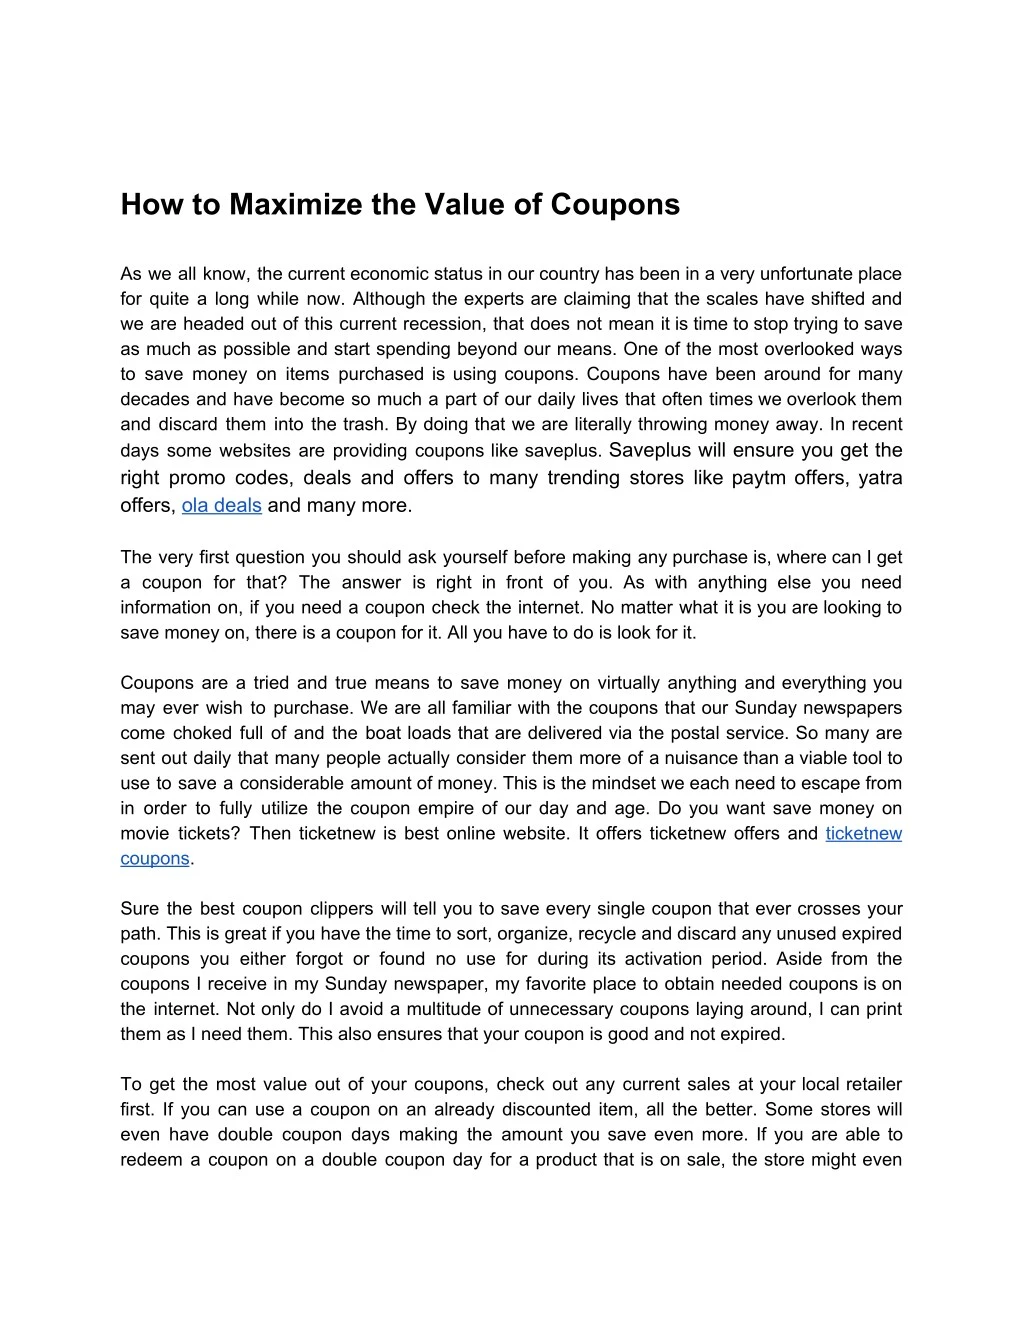 how to maximize the value of coupons